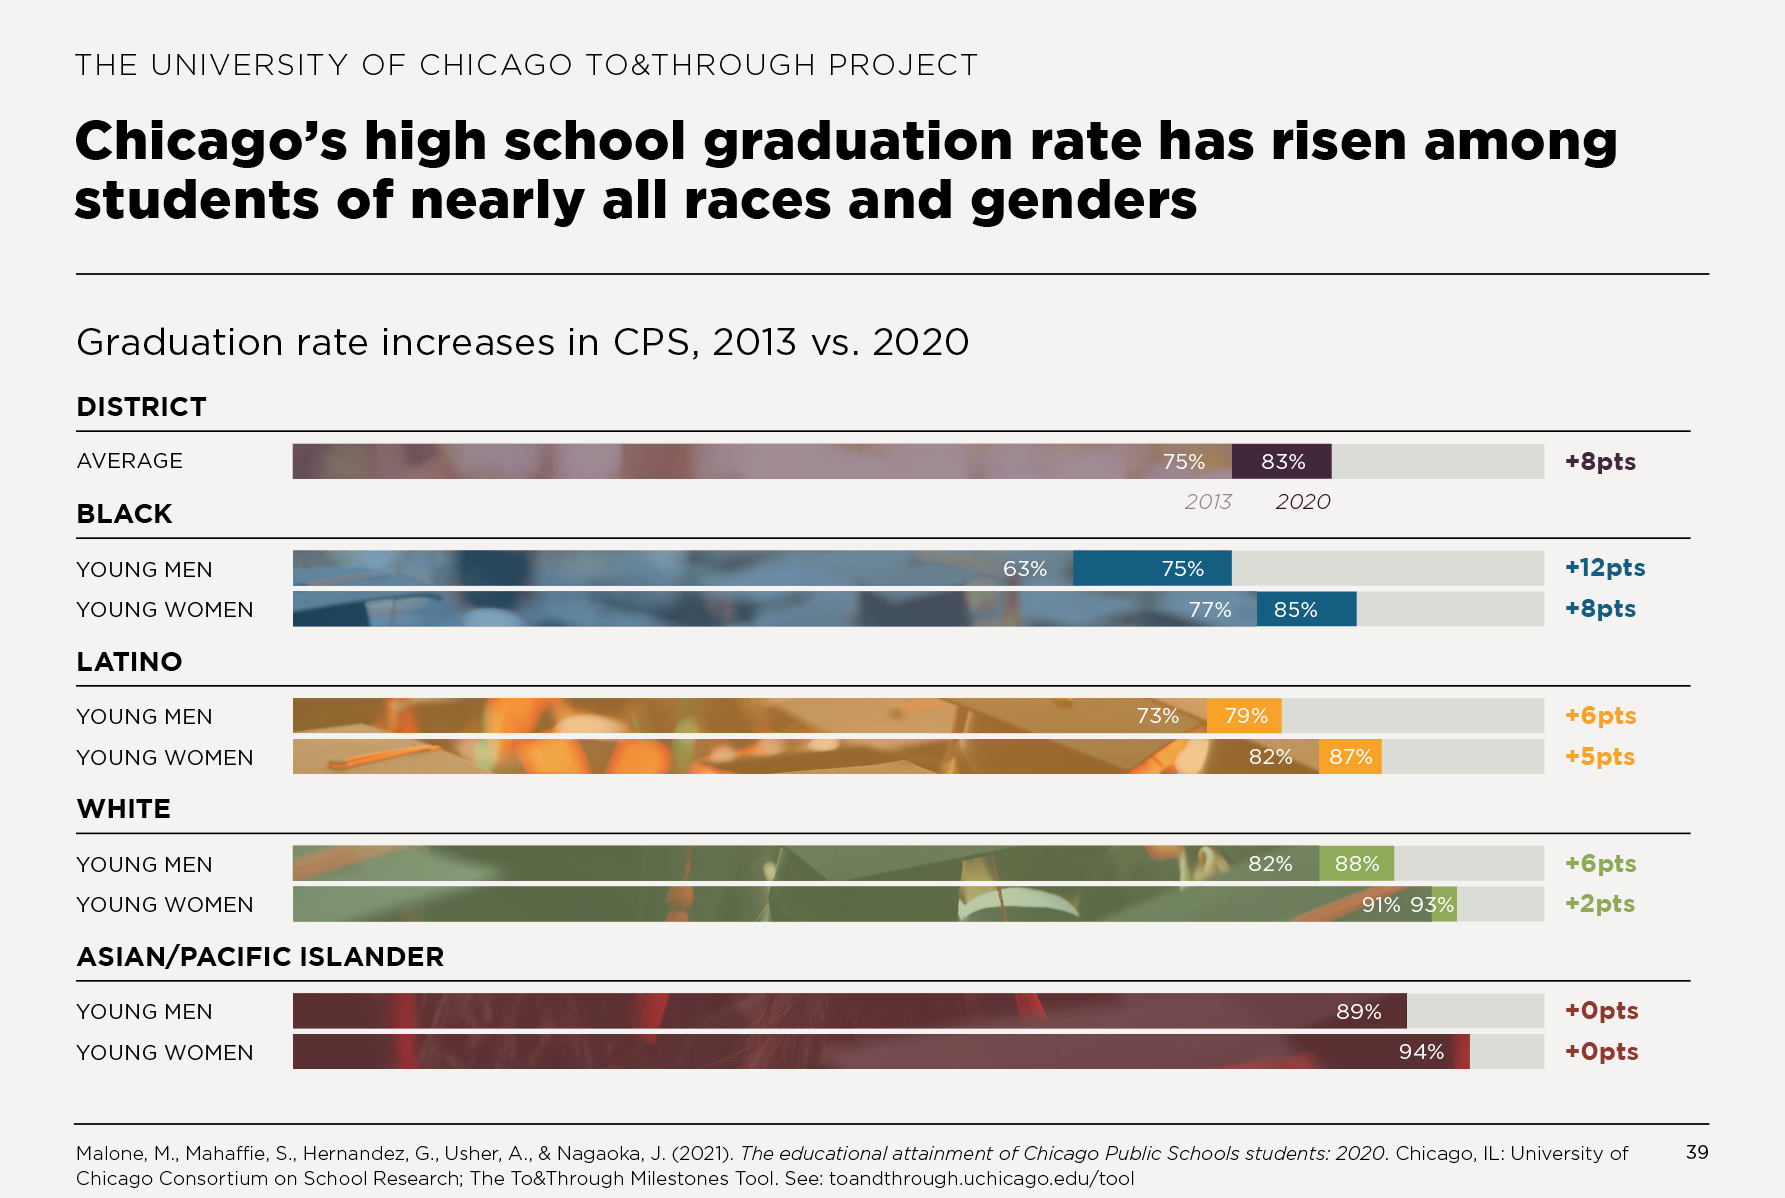 Chicago’s high school graduation rate has risen among students of nearly all races and genders